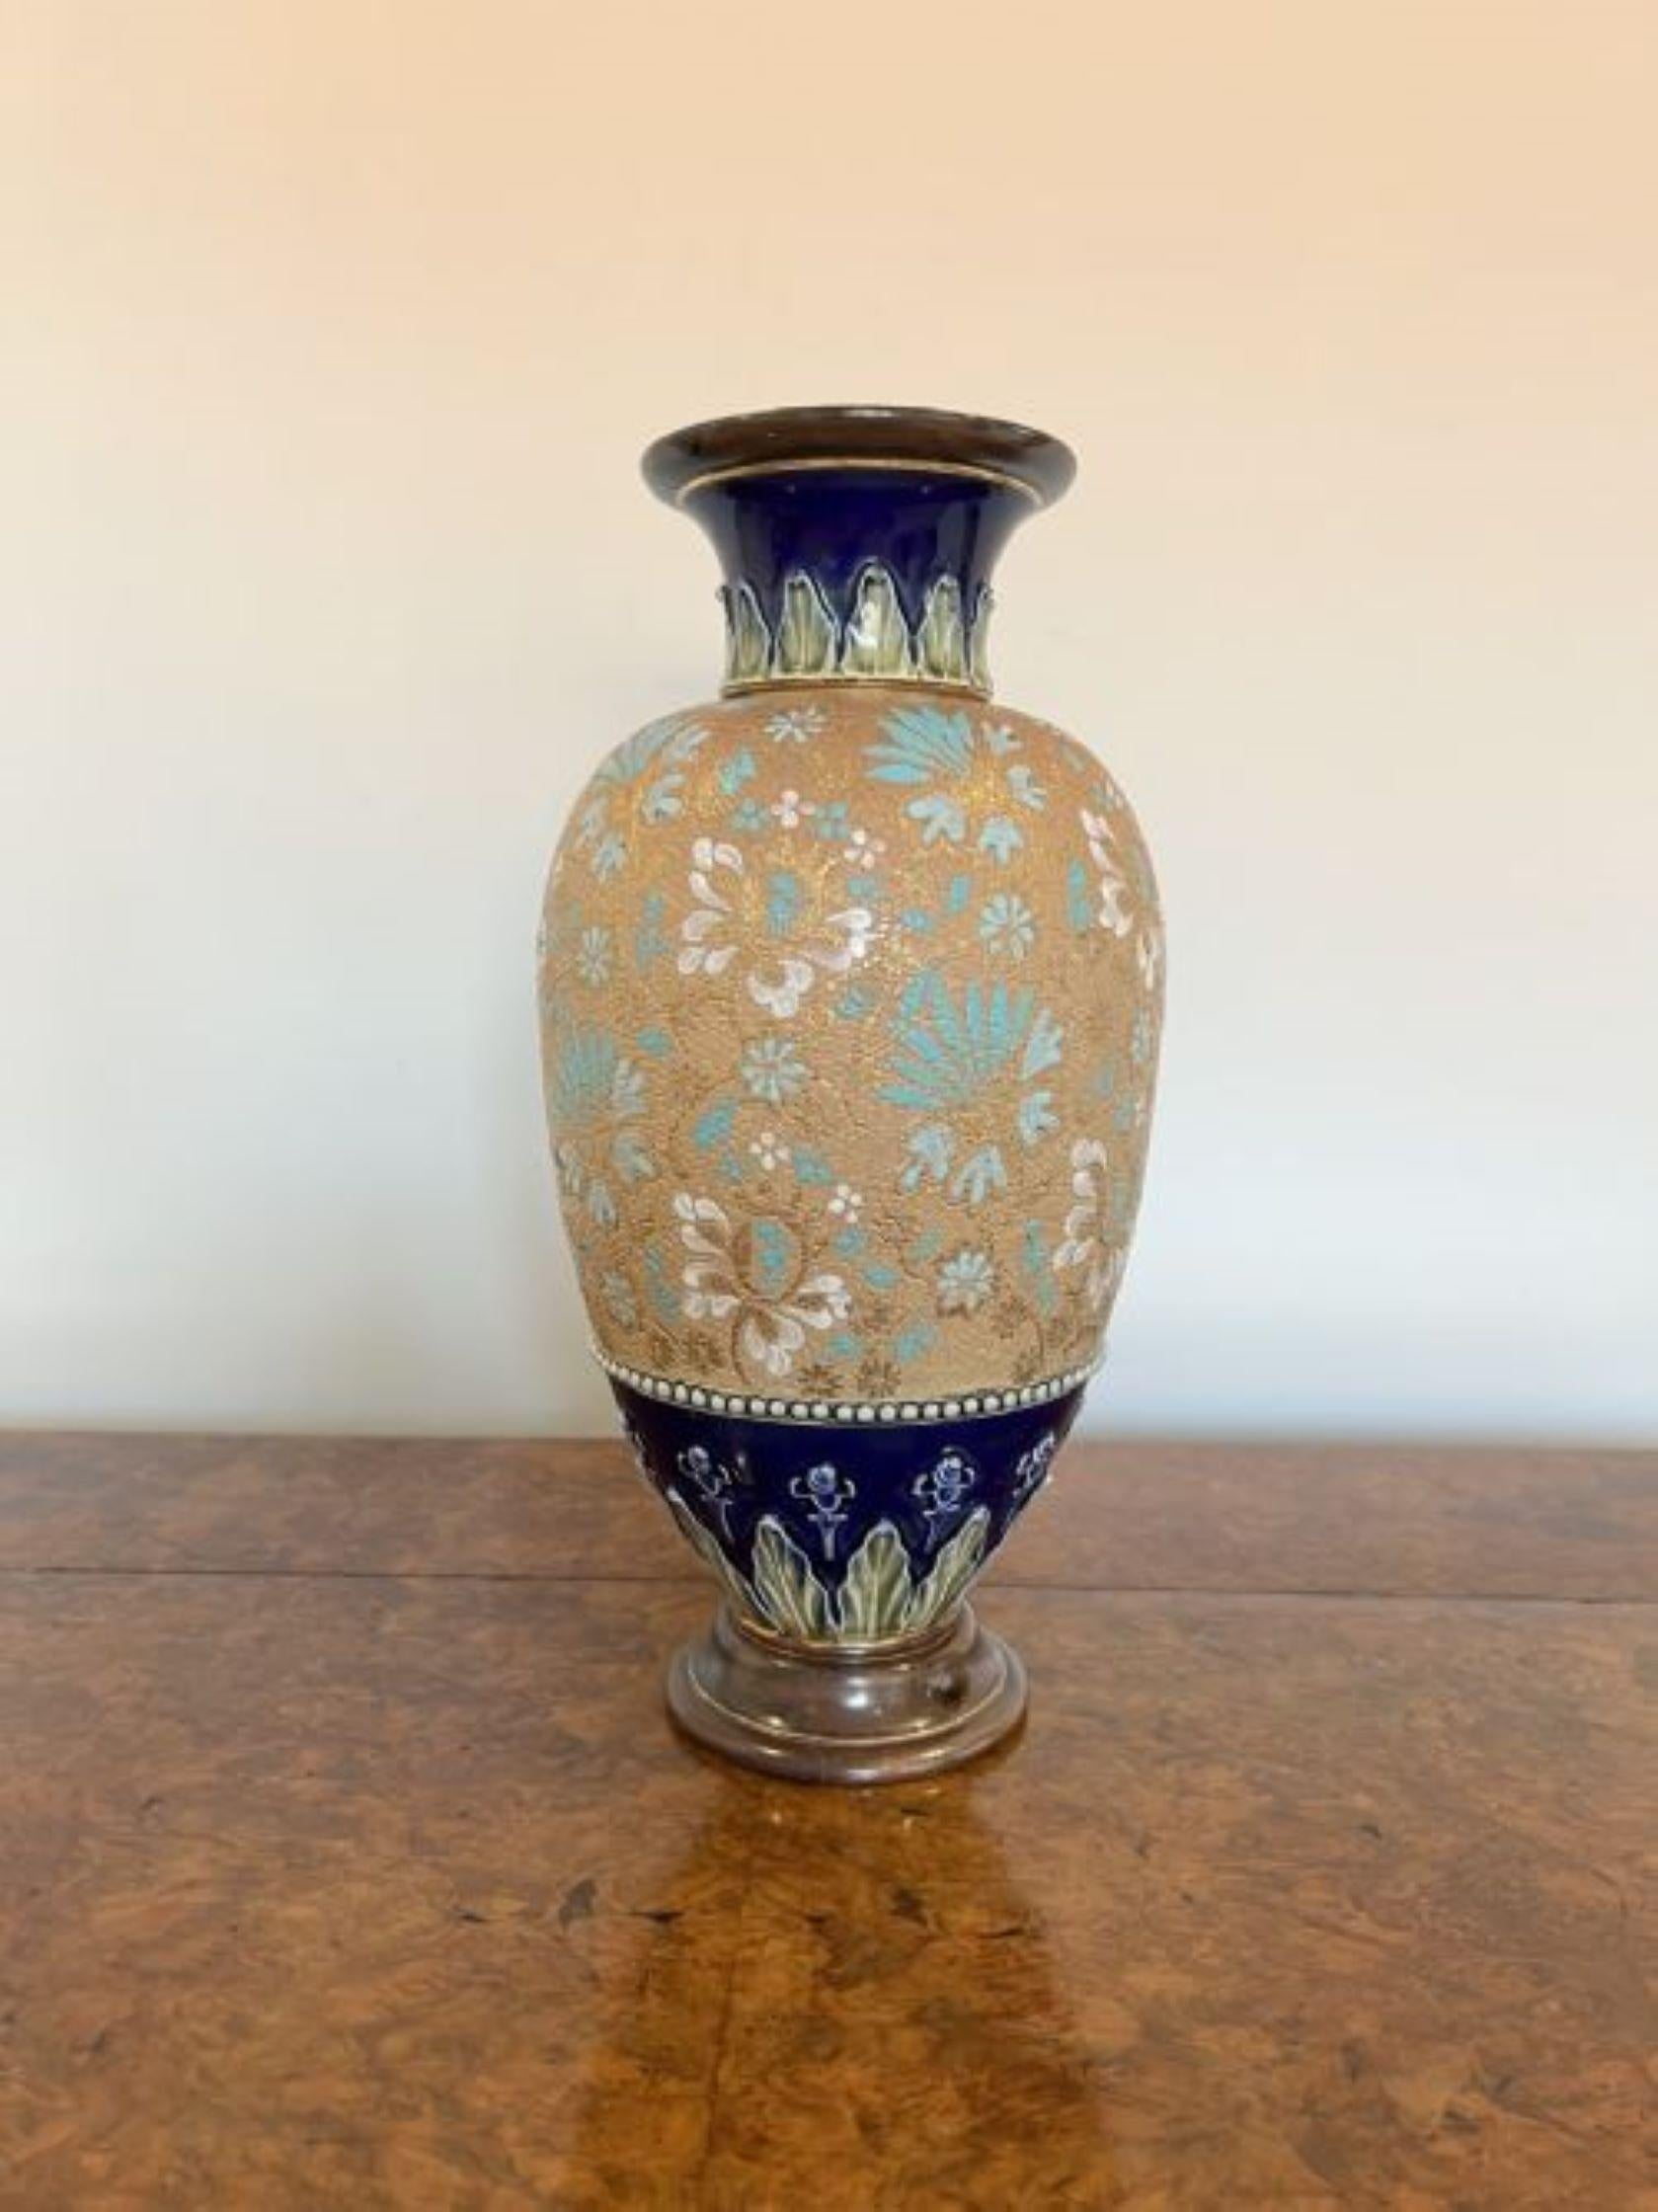 Impressive antique Victorian Doulton vase having an impressive antique Victorian Doulton vase decorated with blue and white flowers on a golden ground together with acanthus leaf decoration to the neck and body, with impressed marks to the base.